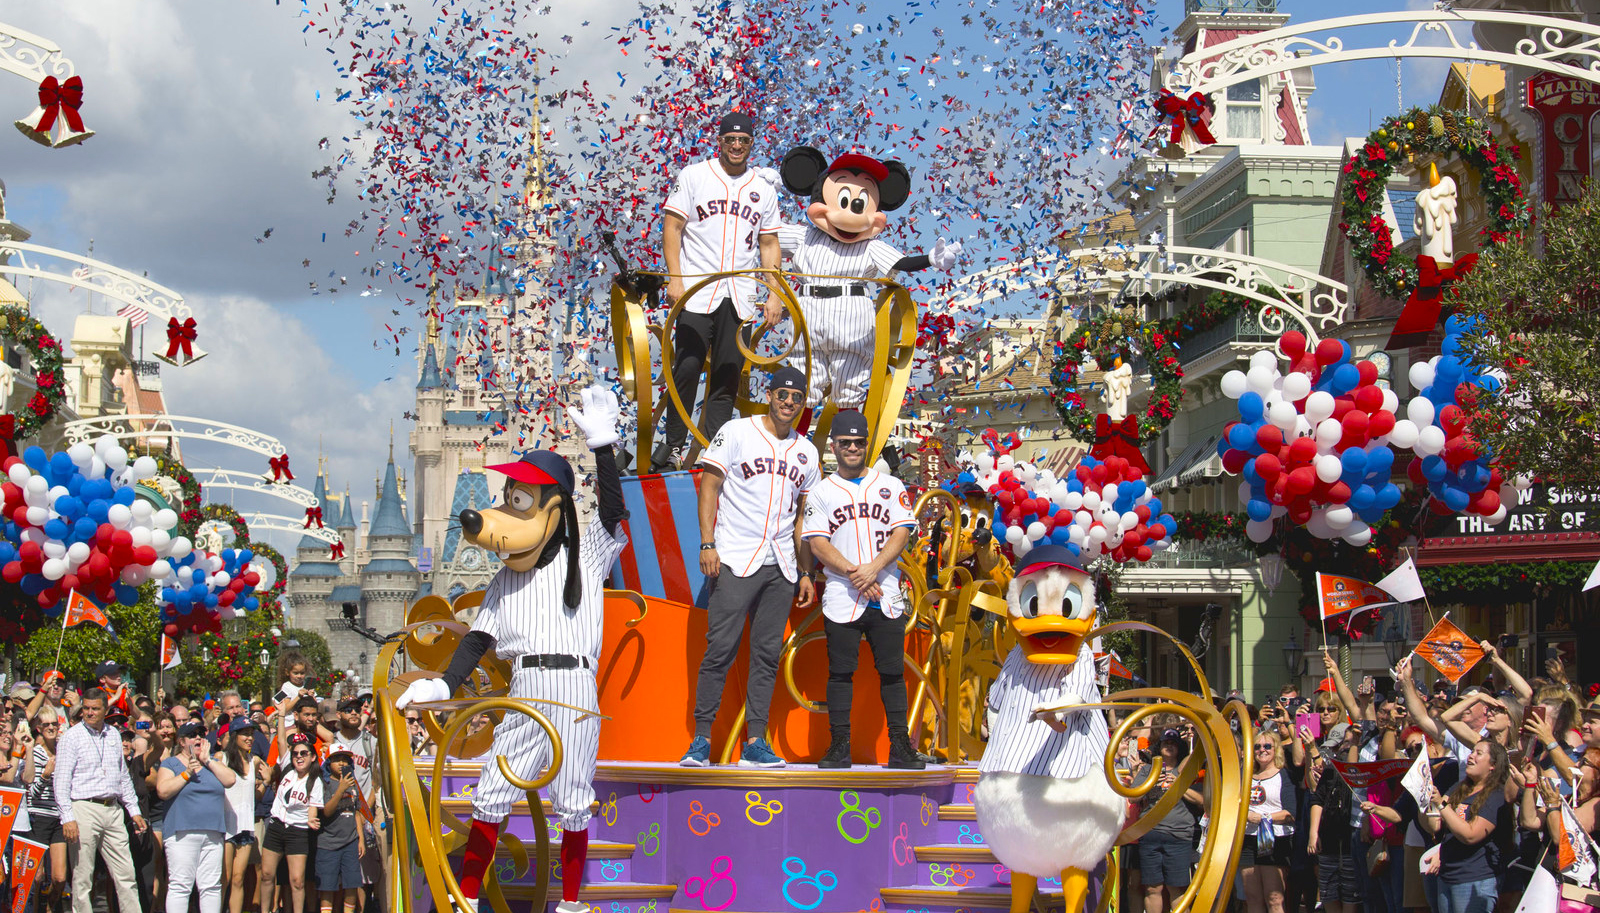 Houston Astros star players (top, then bottom l-r) World Series MVP George Springer, All-Star Carlos Correa and American League batting champion Jose Altuve lead off a World Series victory parade Saturday, Nov. 4, 2017, at Magic Kingdom Park in Lake Buena Vista, Fla. The Walt Disney World Parade saluted the team's first world title in its 56-year history. (Gregg Newton, photographer)